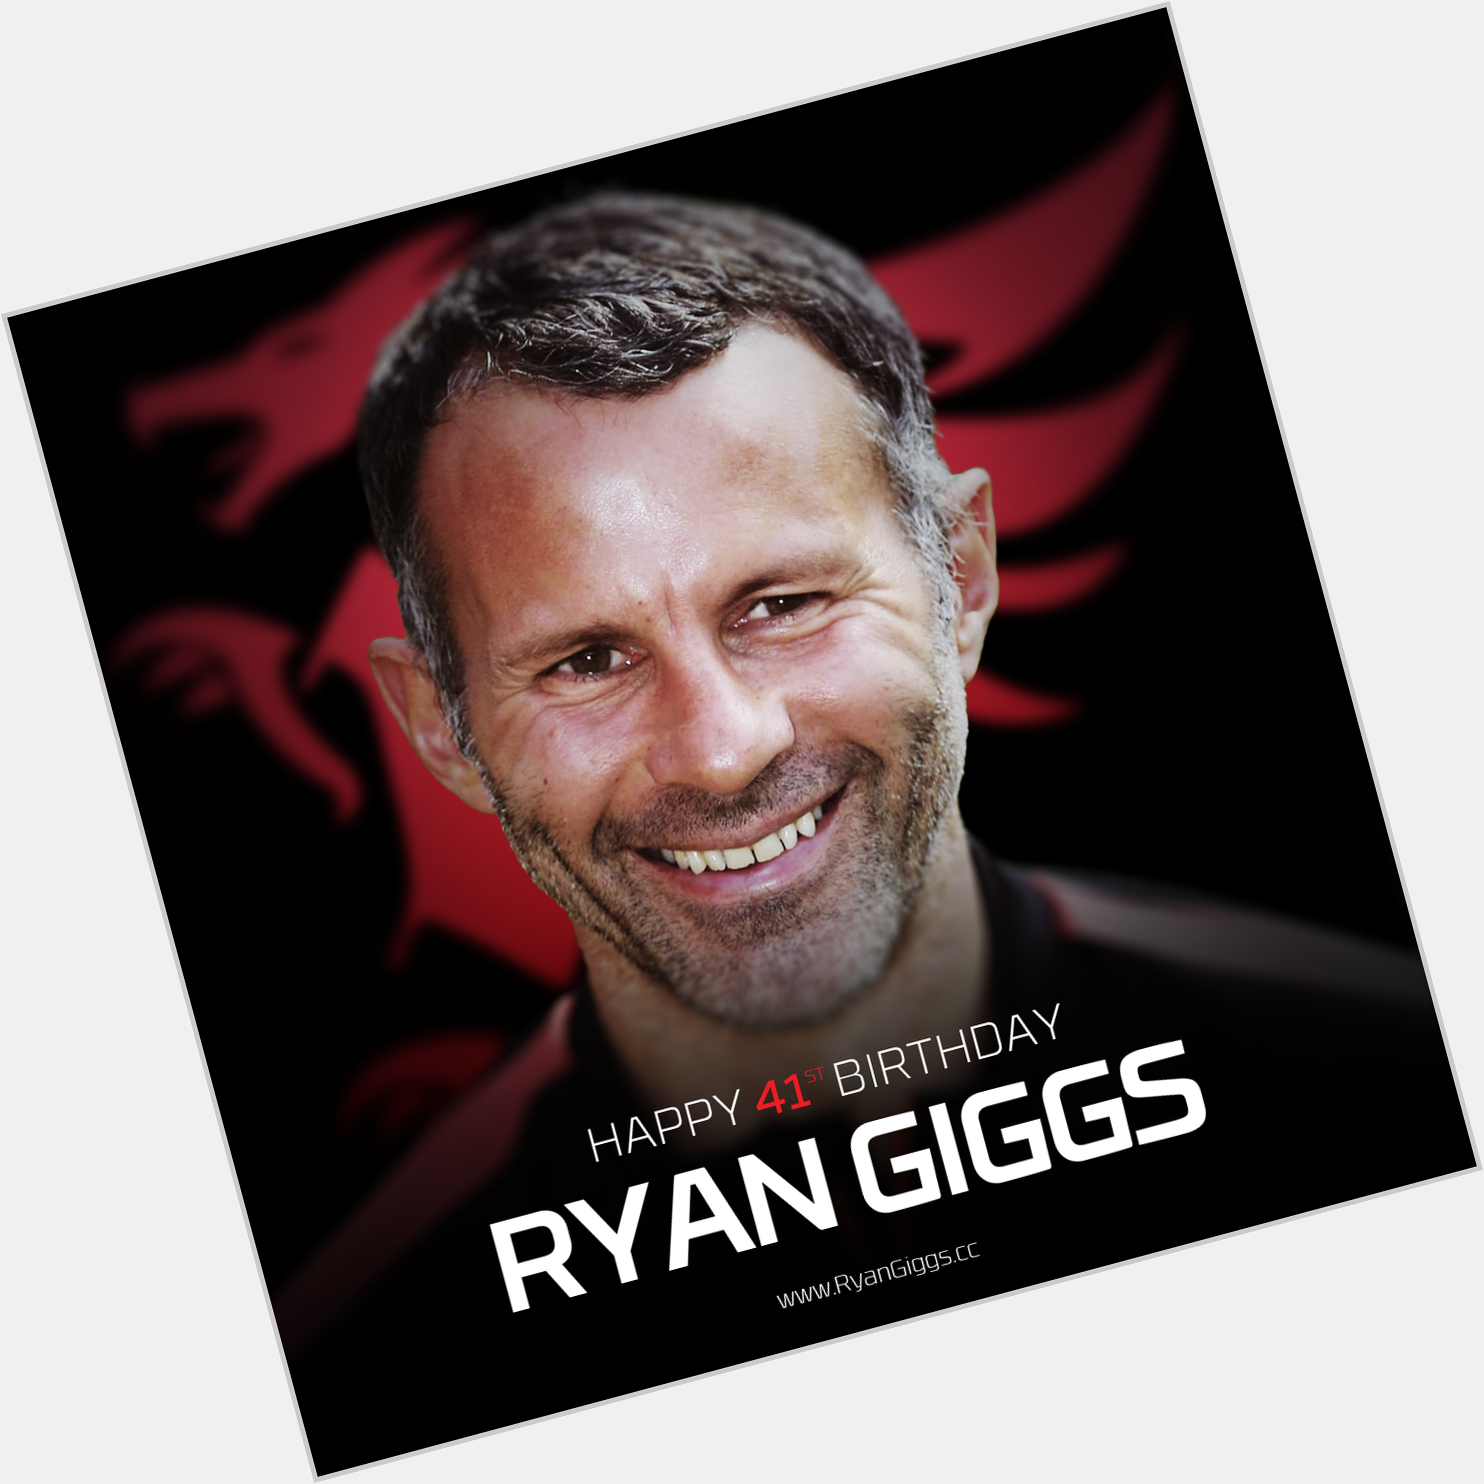 Happy 41st birthday, Ryan Giggs. Send your wishes to assistant manager! 